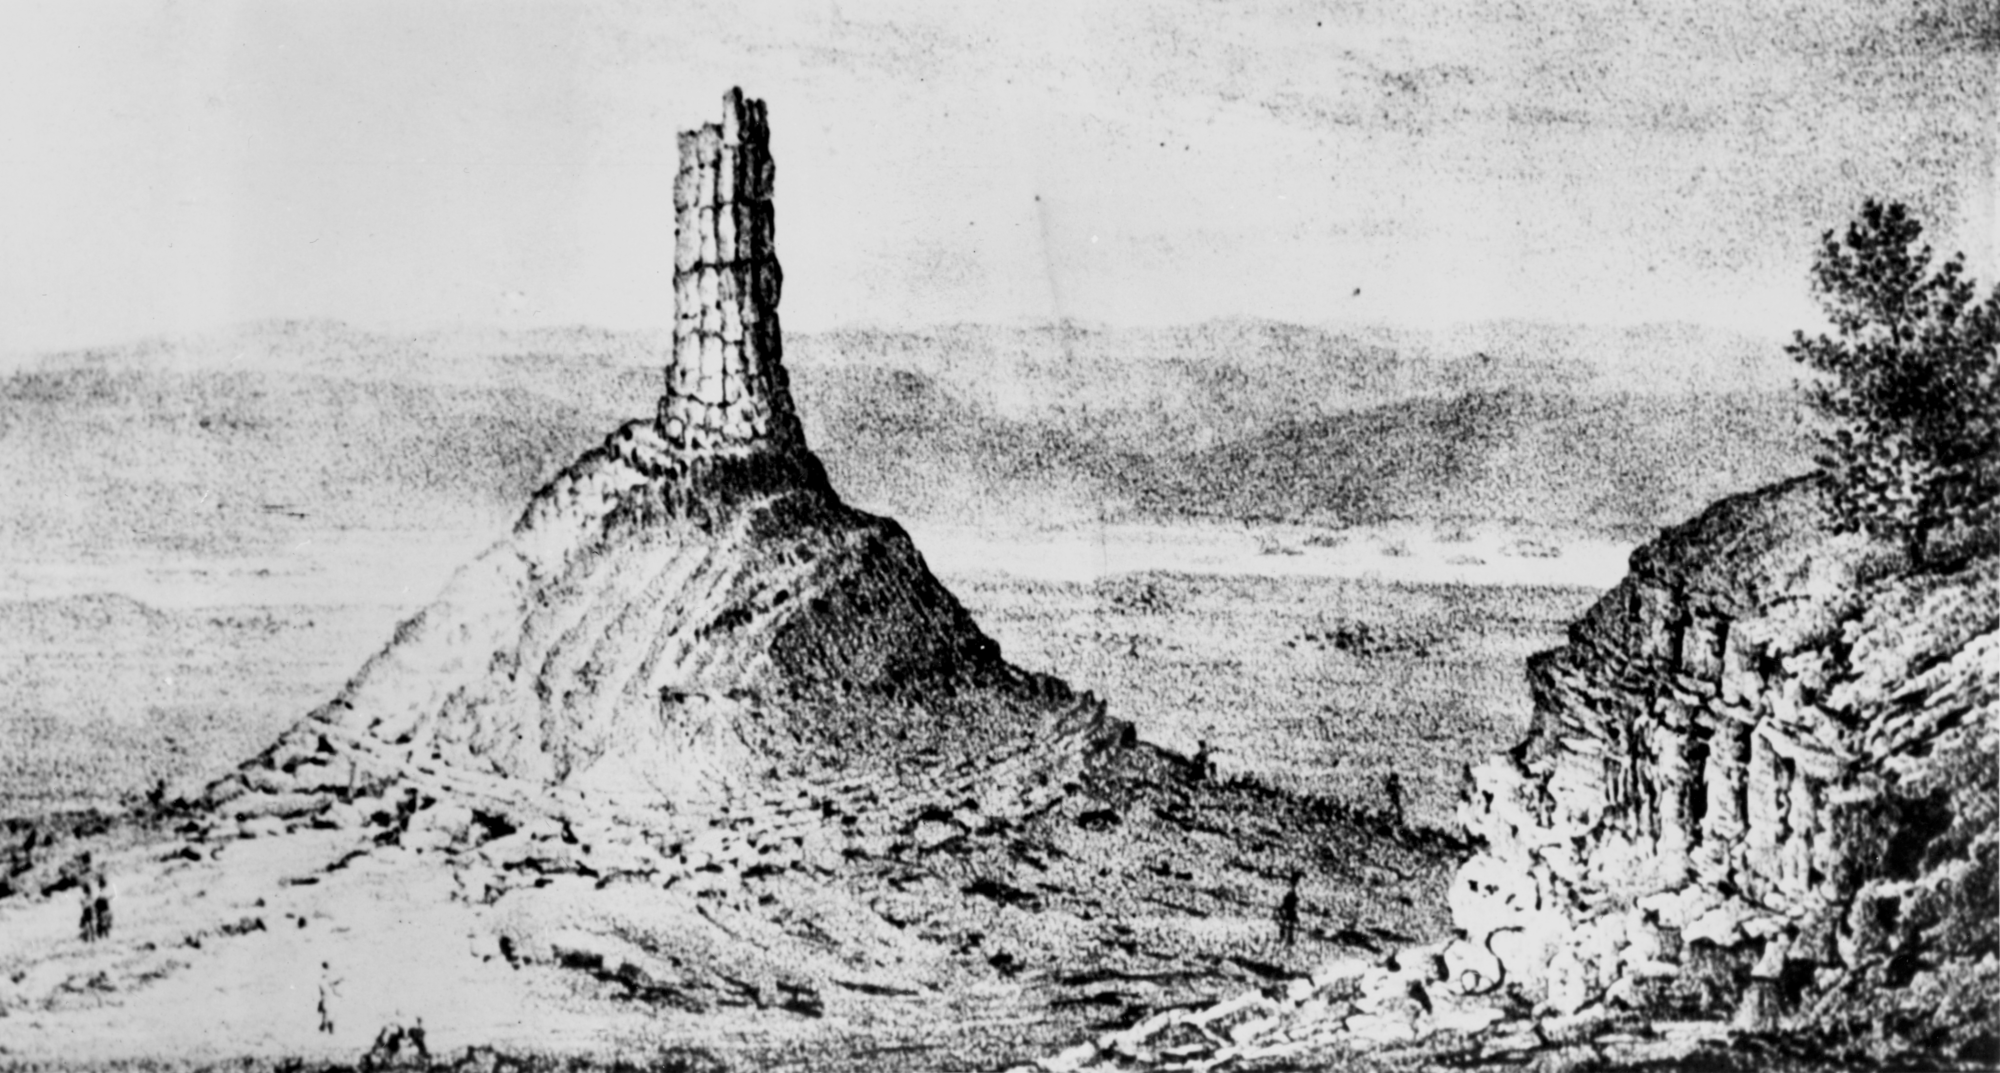 [C538-32] Father Nicholas Point, traveling in John Bidwell’s party in 1841, drew Chimney Rock, the basis for a later engraving.